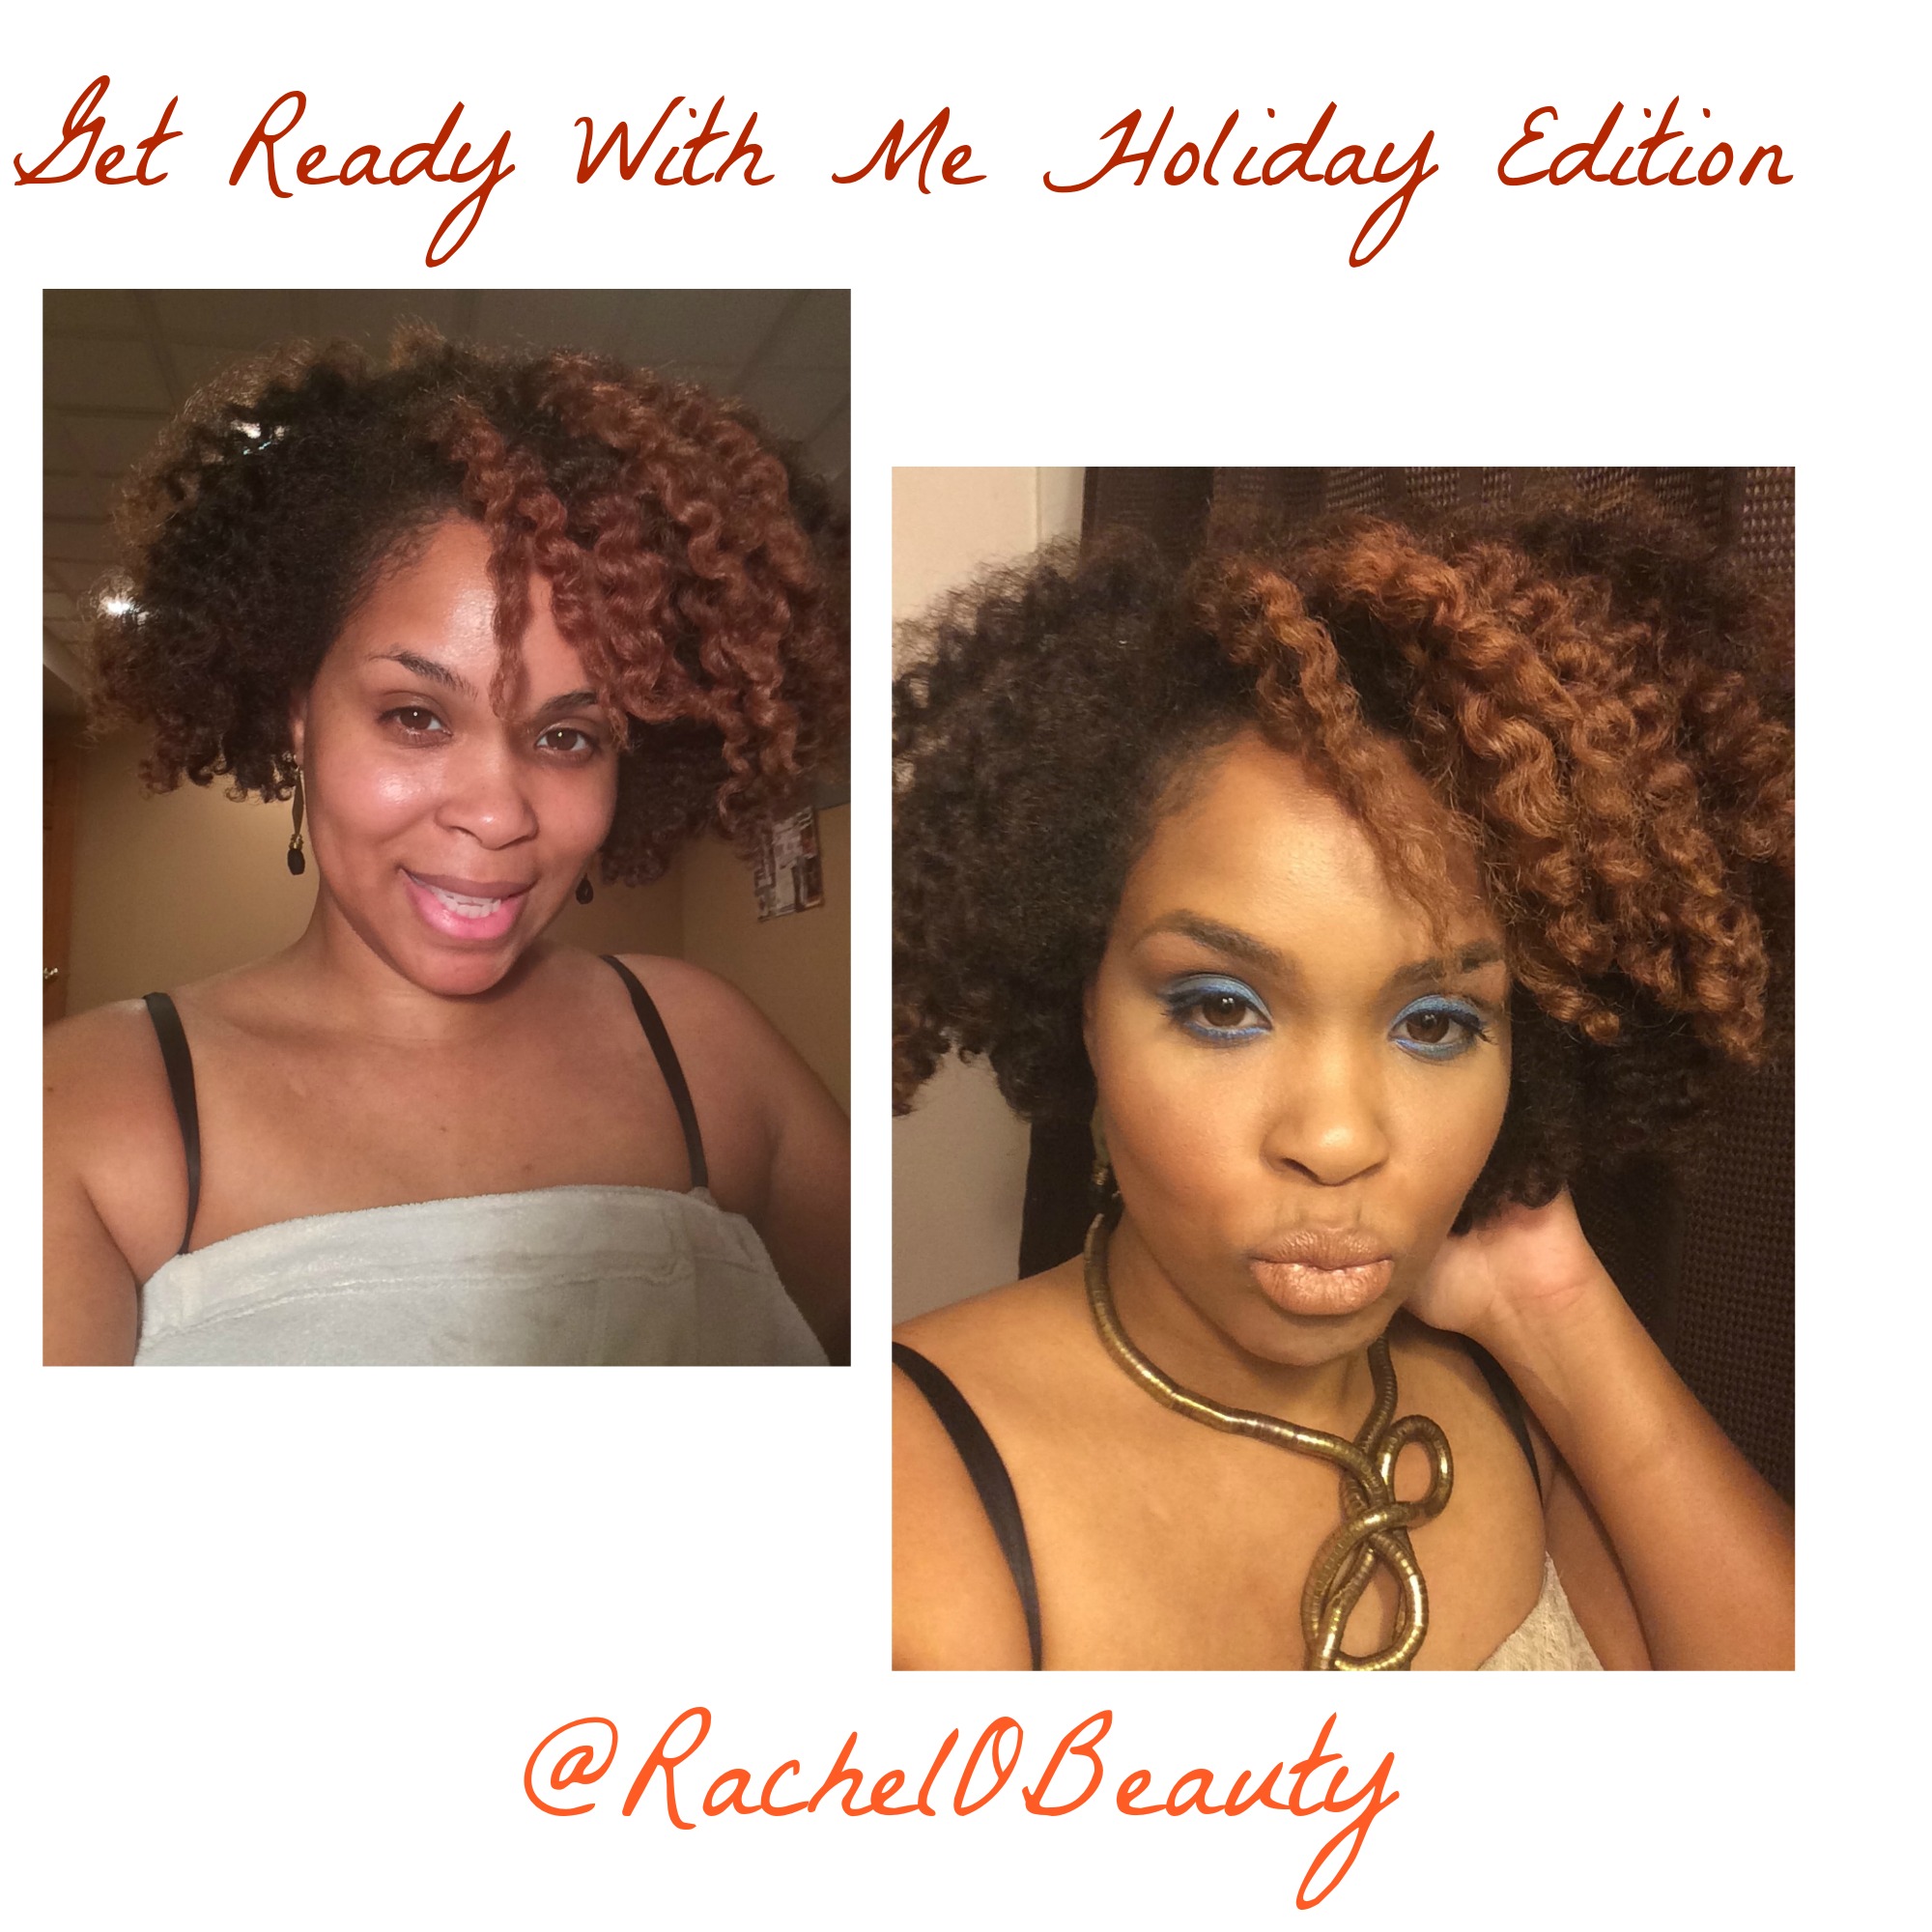 Get Ready With Me Holiday Video